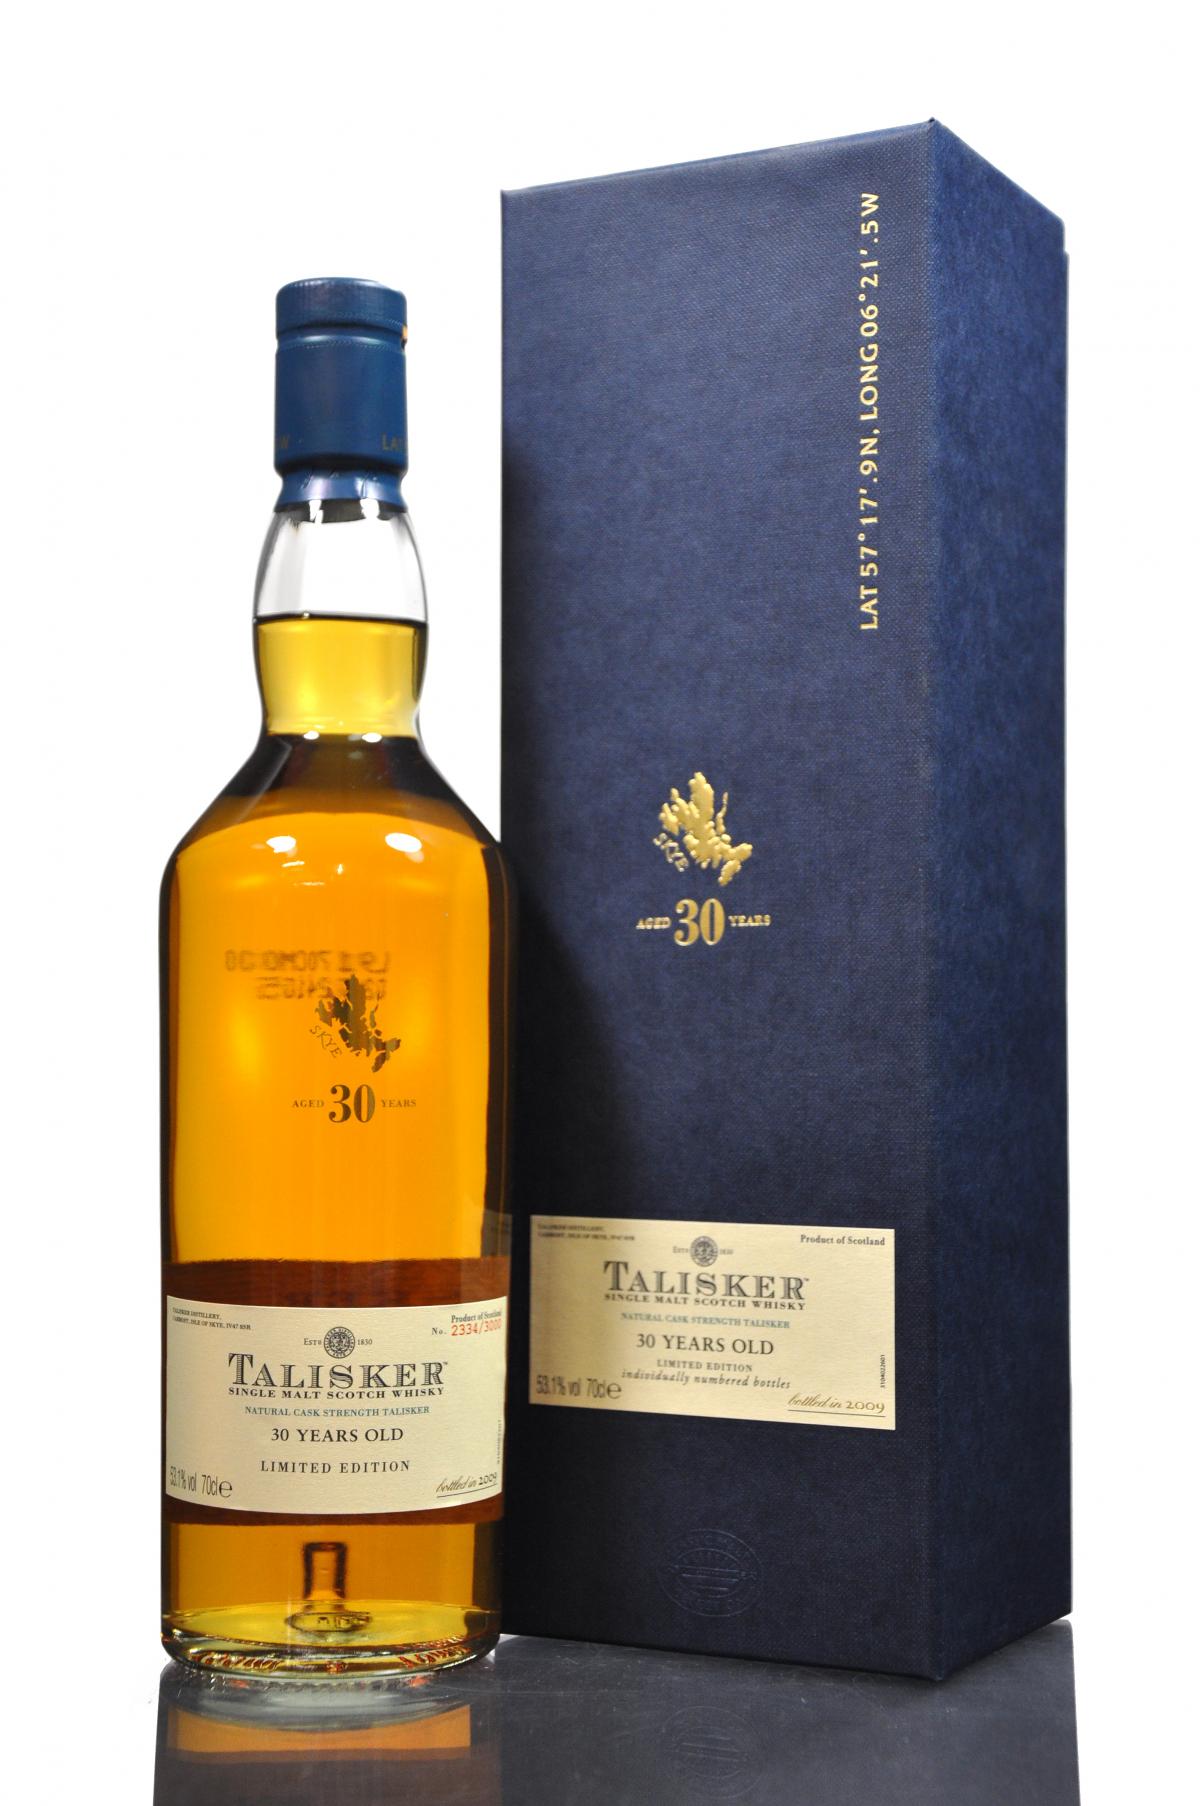 Talisker 30 Year Old - 2009 Edition